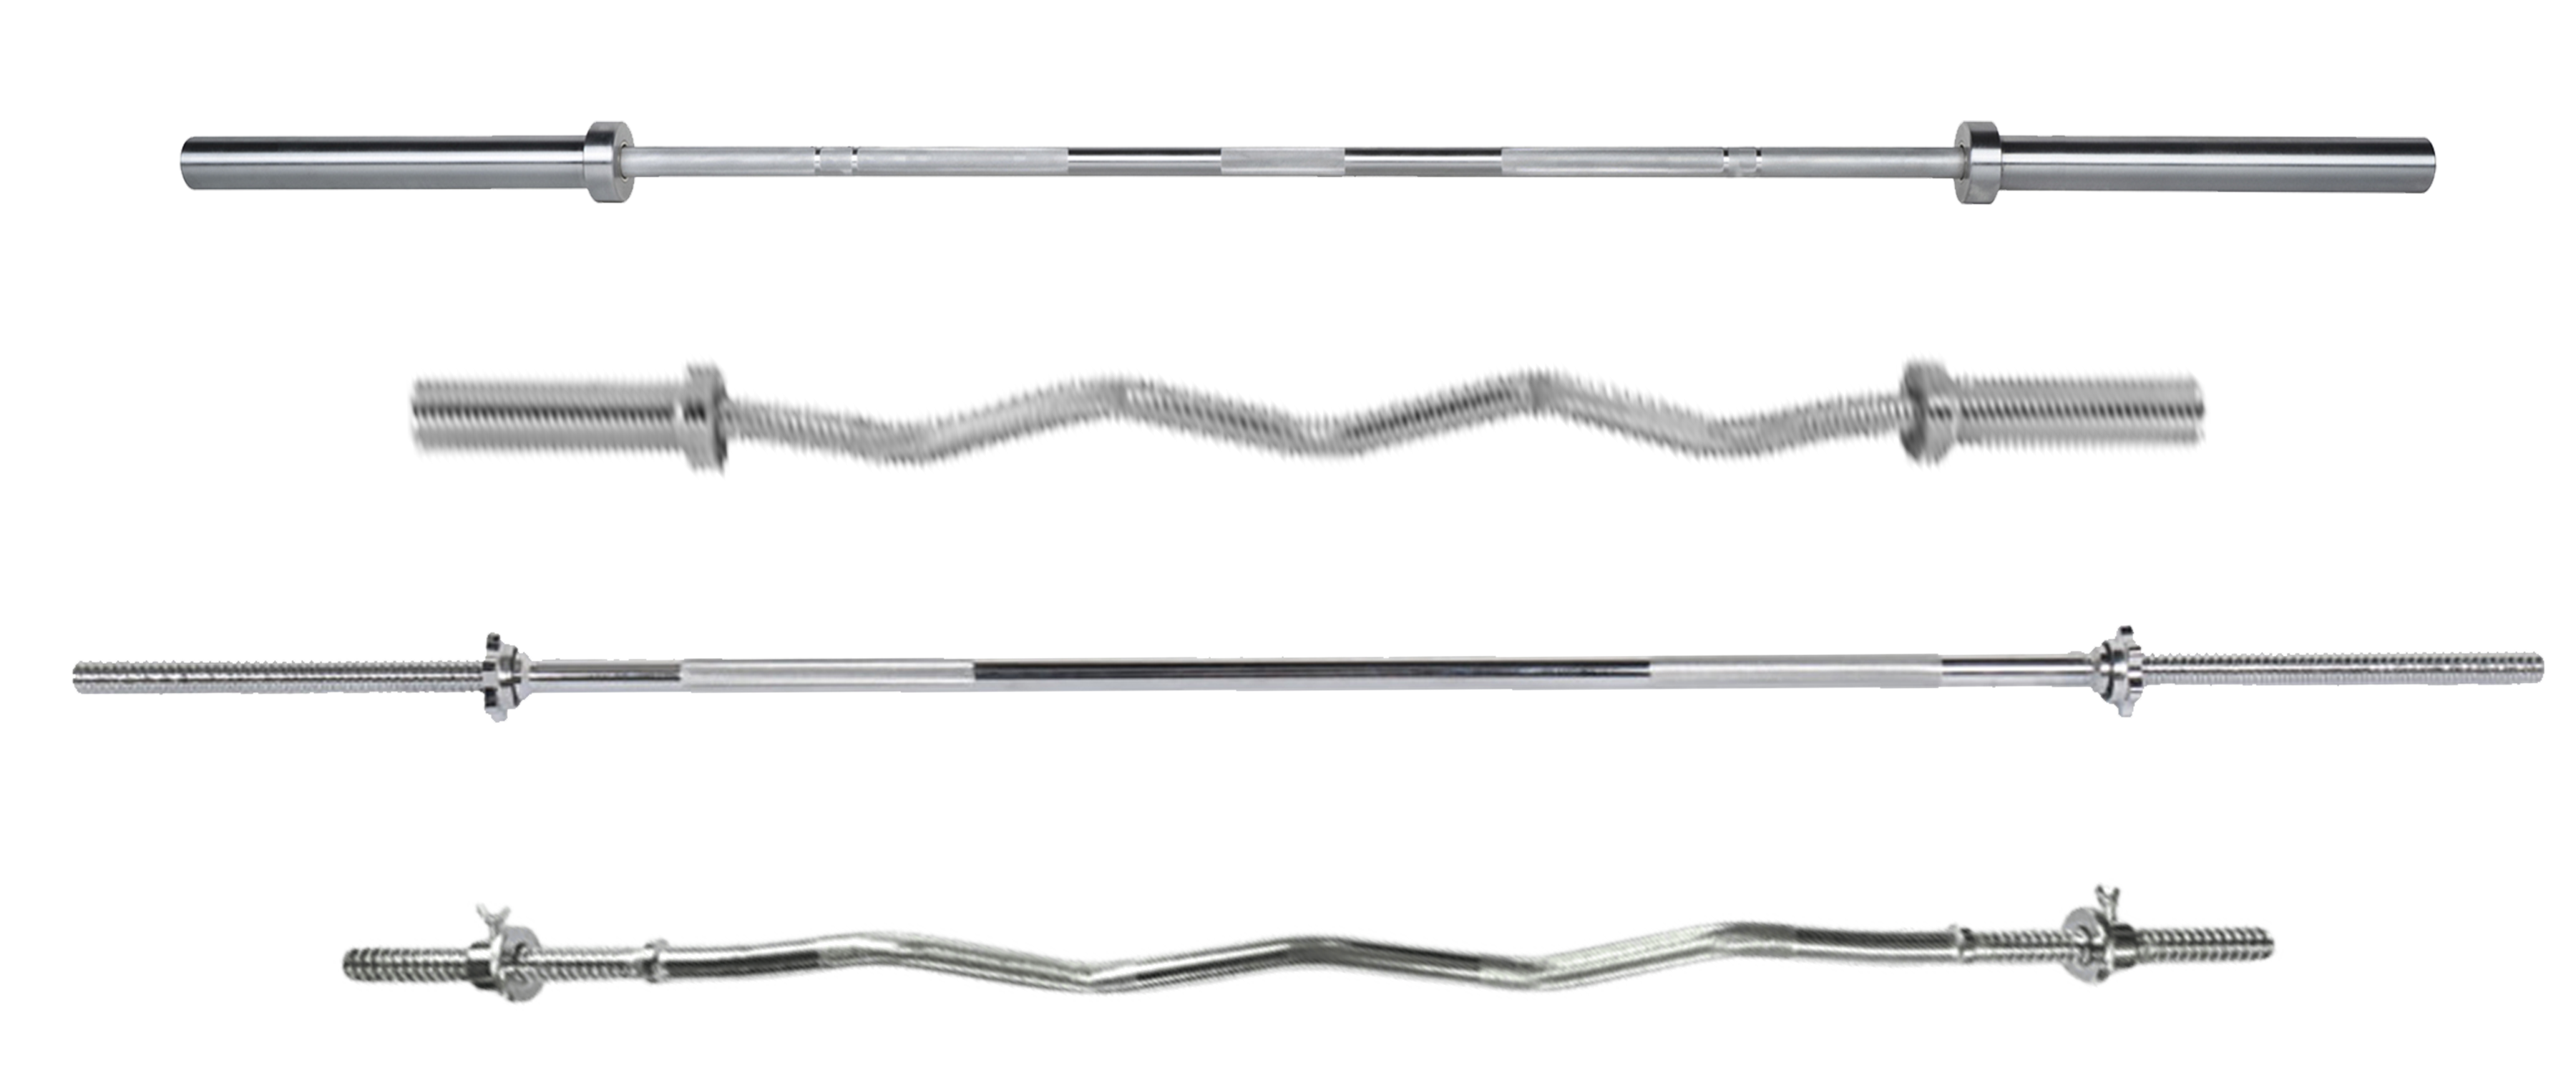 Standard and olympic Bars